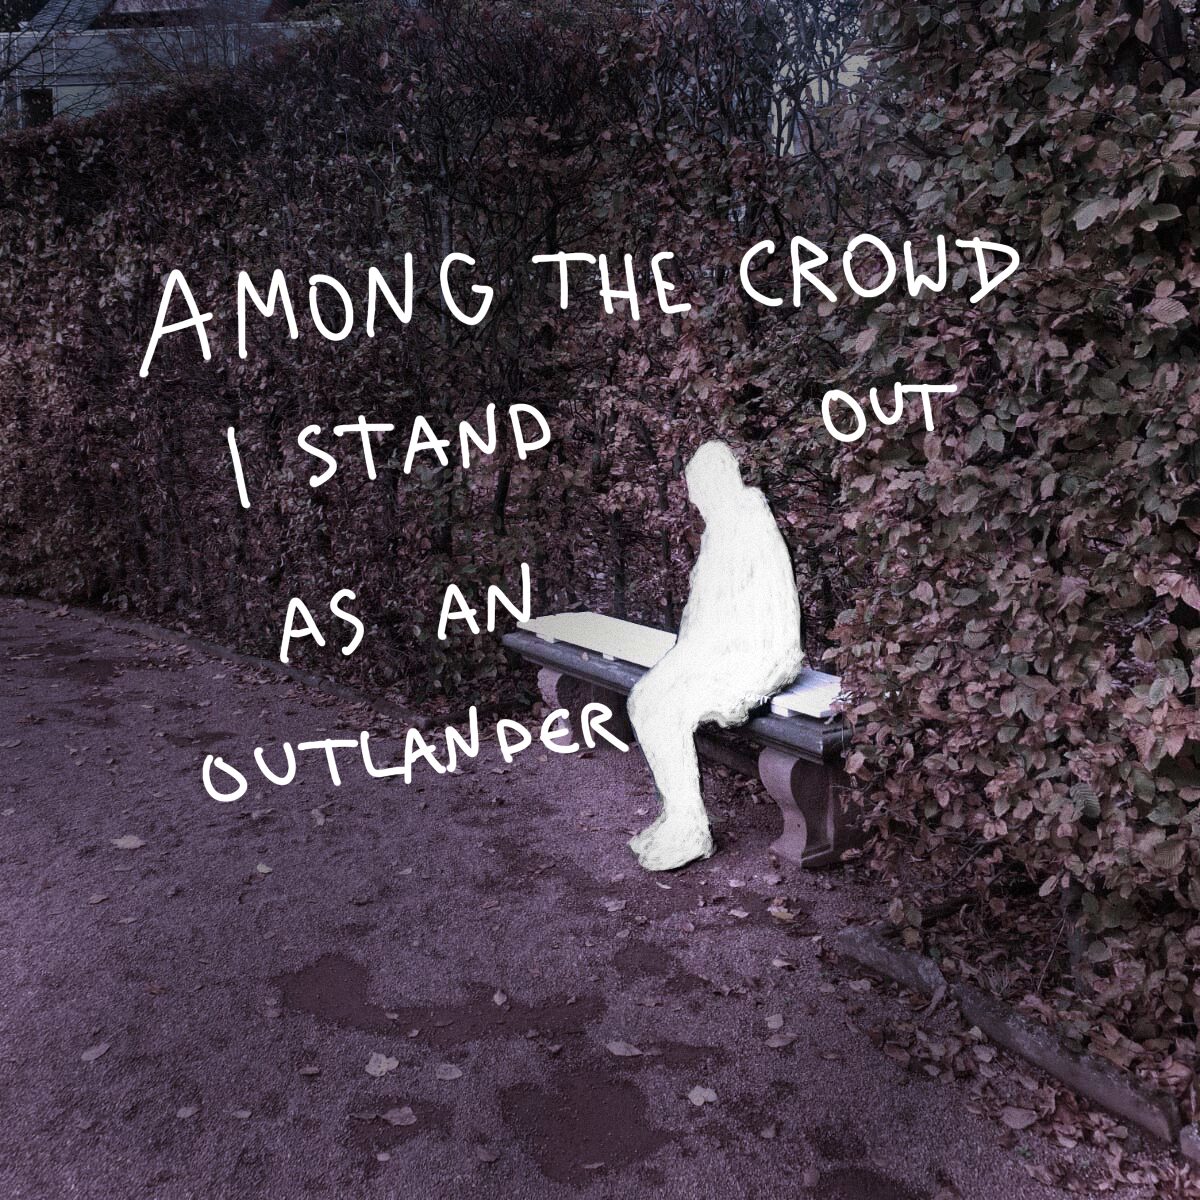 Text on the picture: Among the crowd I stand out as an outlander.